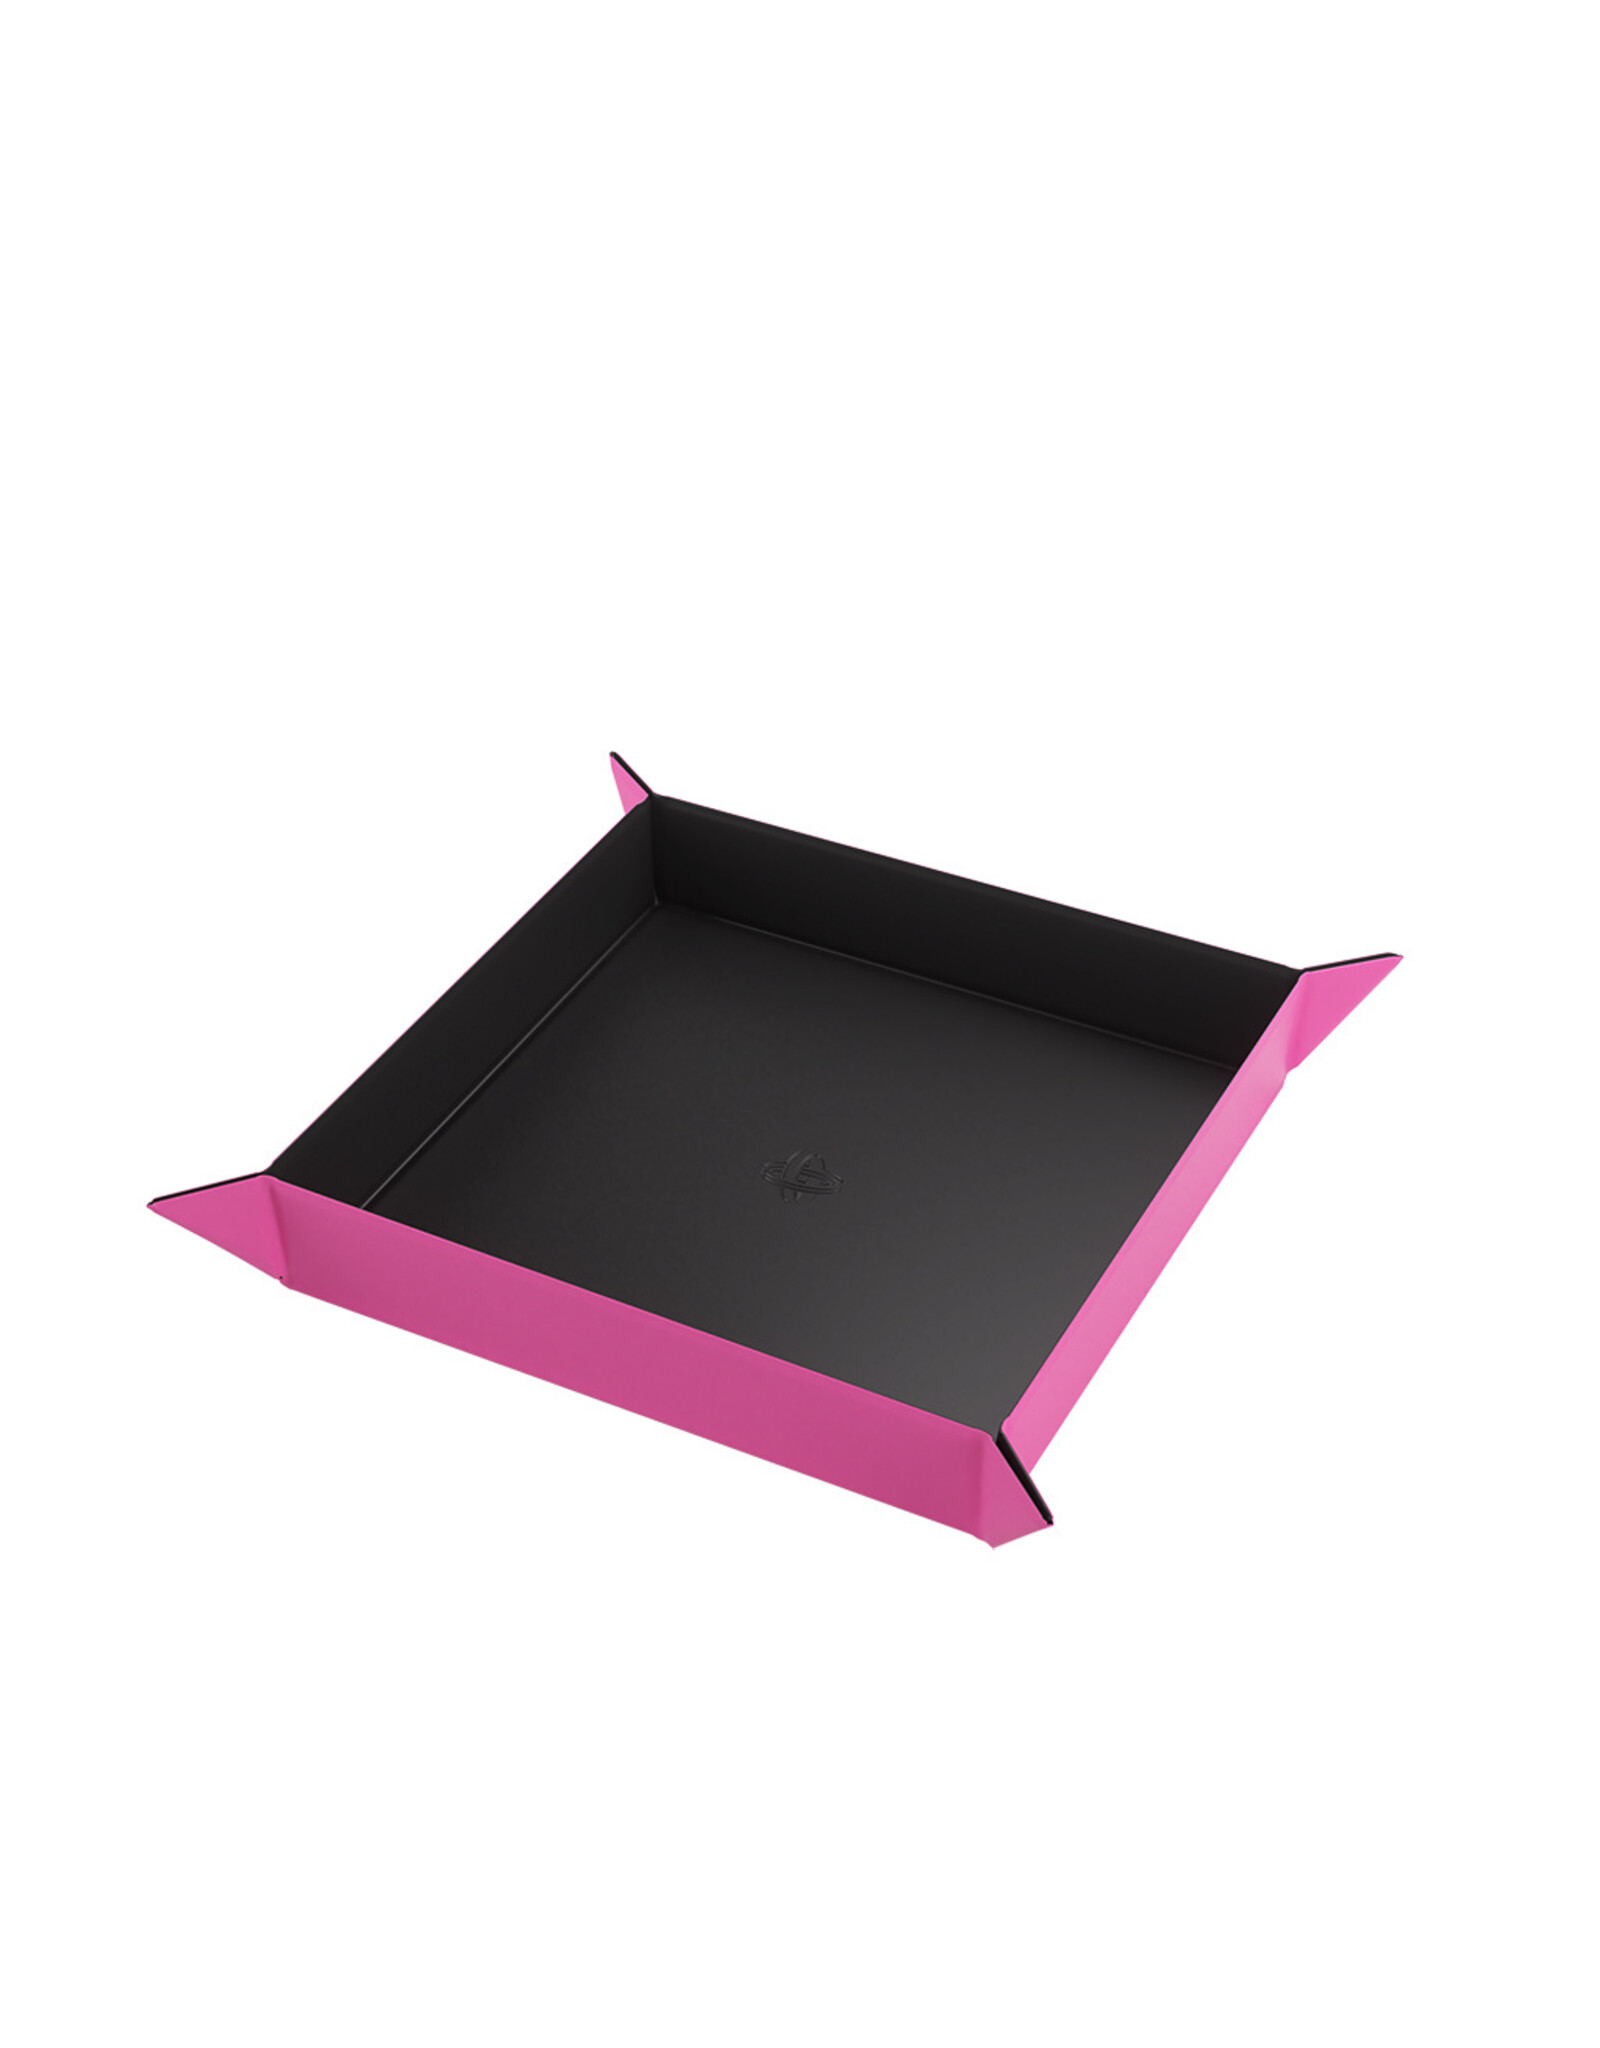 GameGenic Magnetic Dice Tray Black/Pink